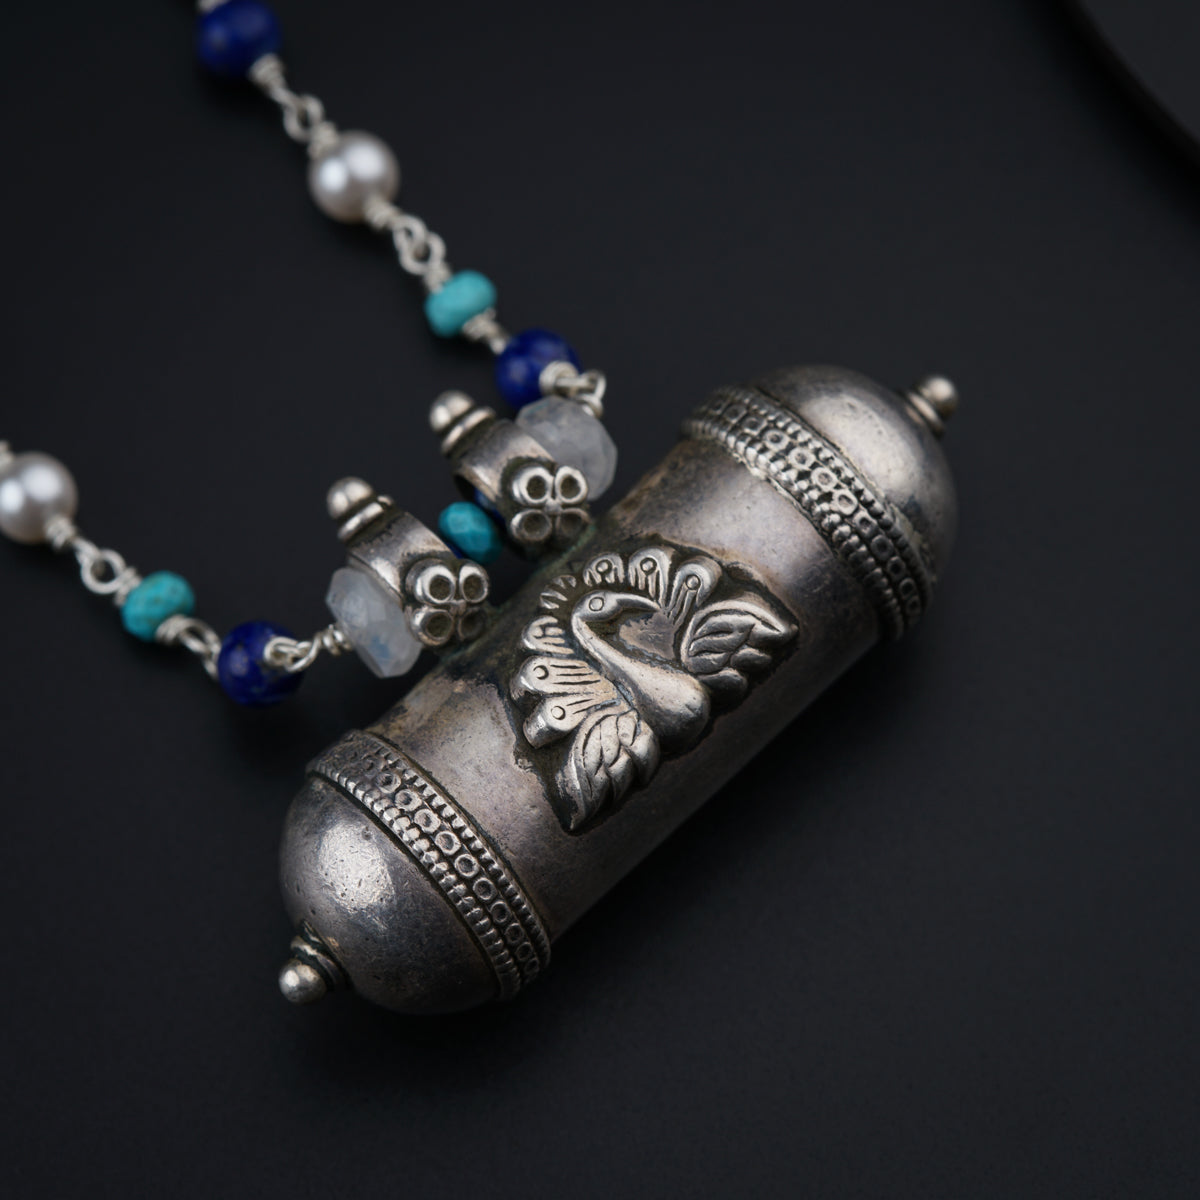 Antique Silver Necklace with Pearls, Lapis and Turquoise beads